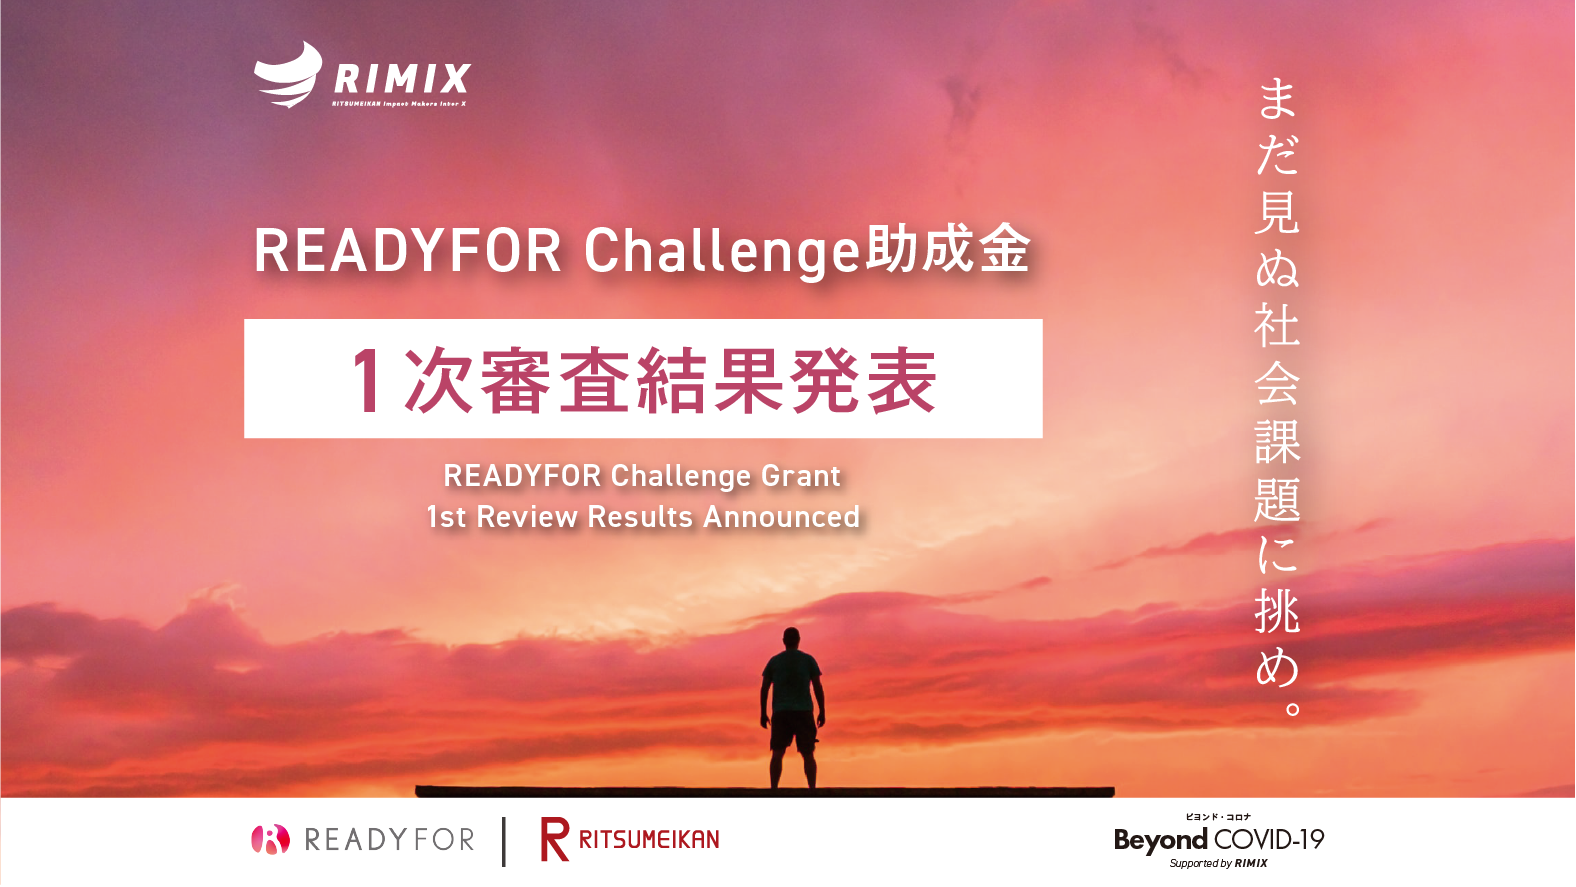 READYFOR Challenge助成金・1次審査結果について – First Review Results Announced